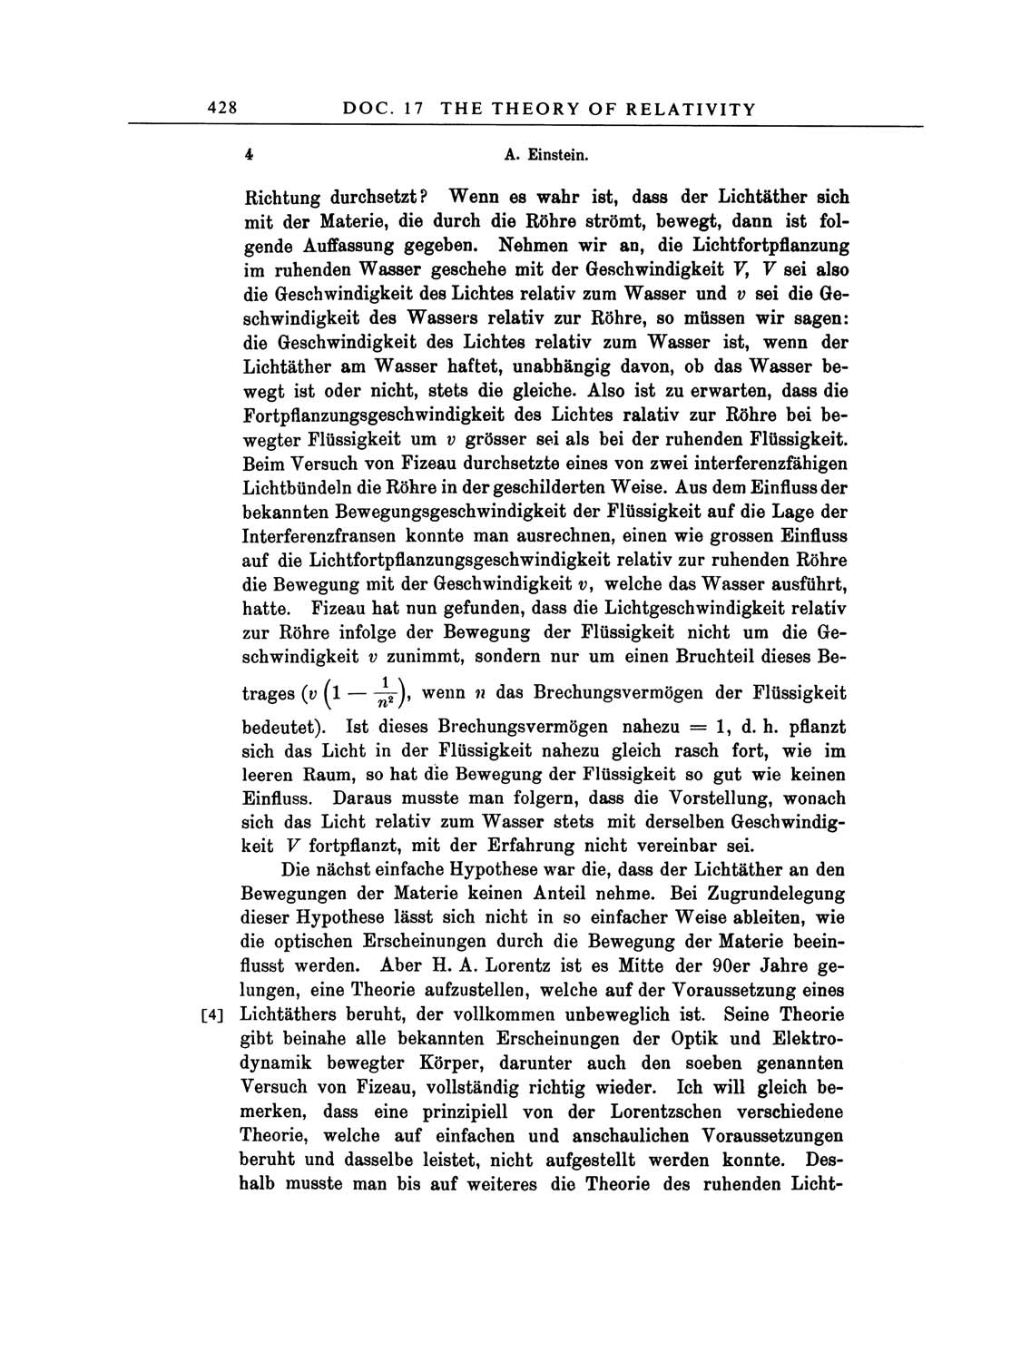 Volume 3: The Swiss Years: Writings 1909-1911 page 428